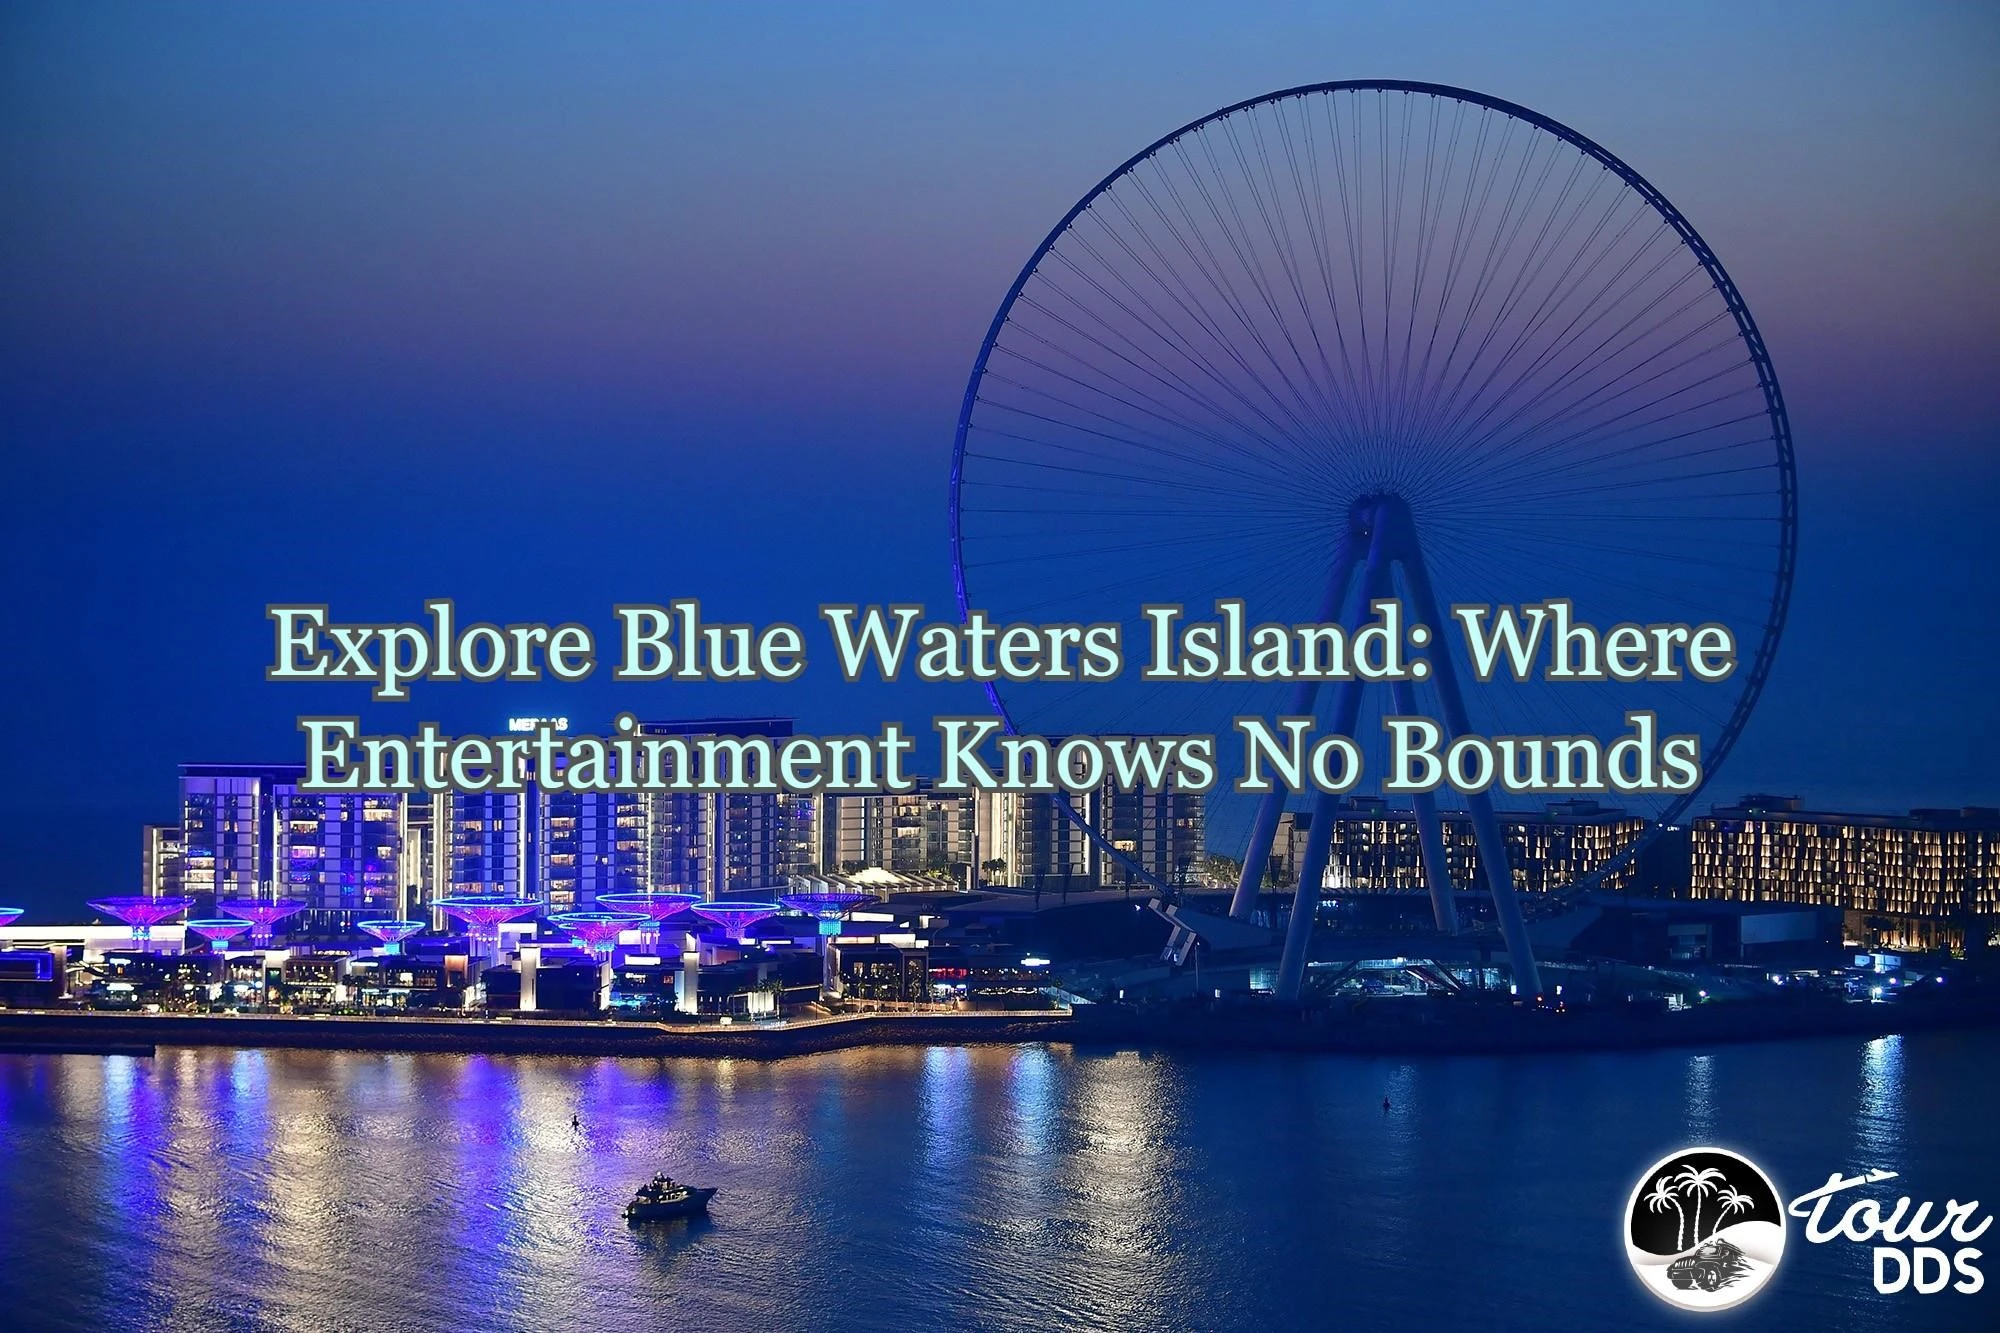 Things to see and do on Bluewaters Island